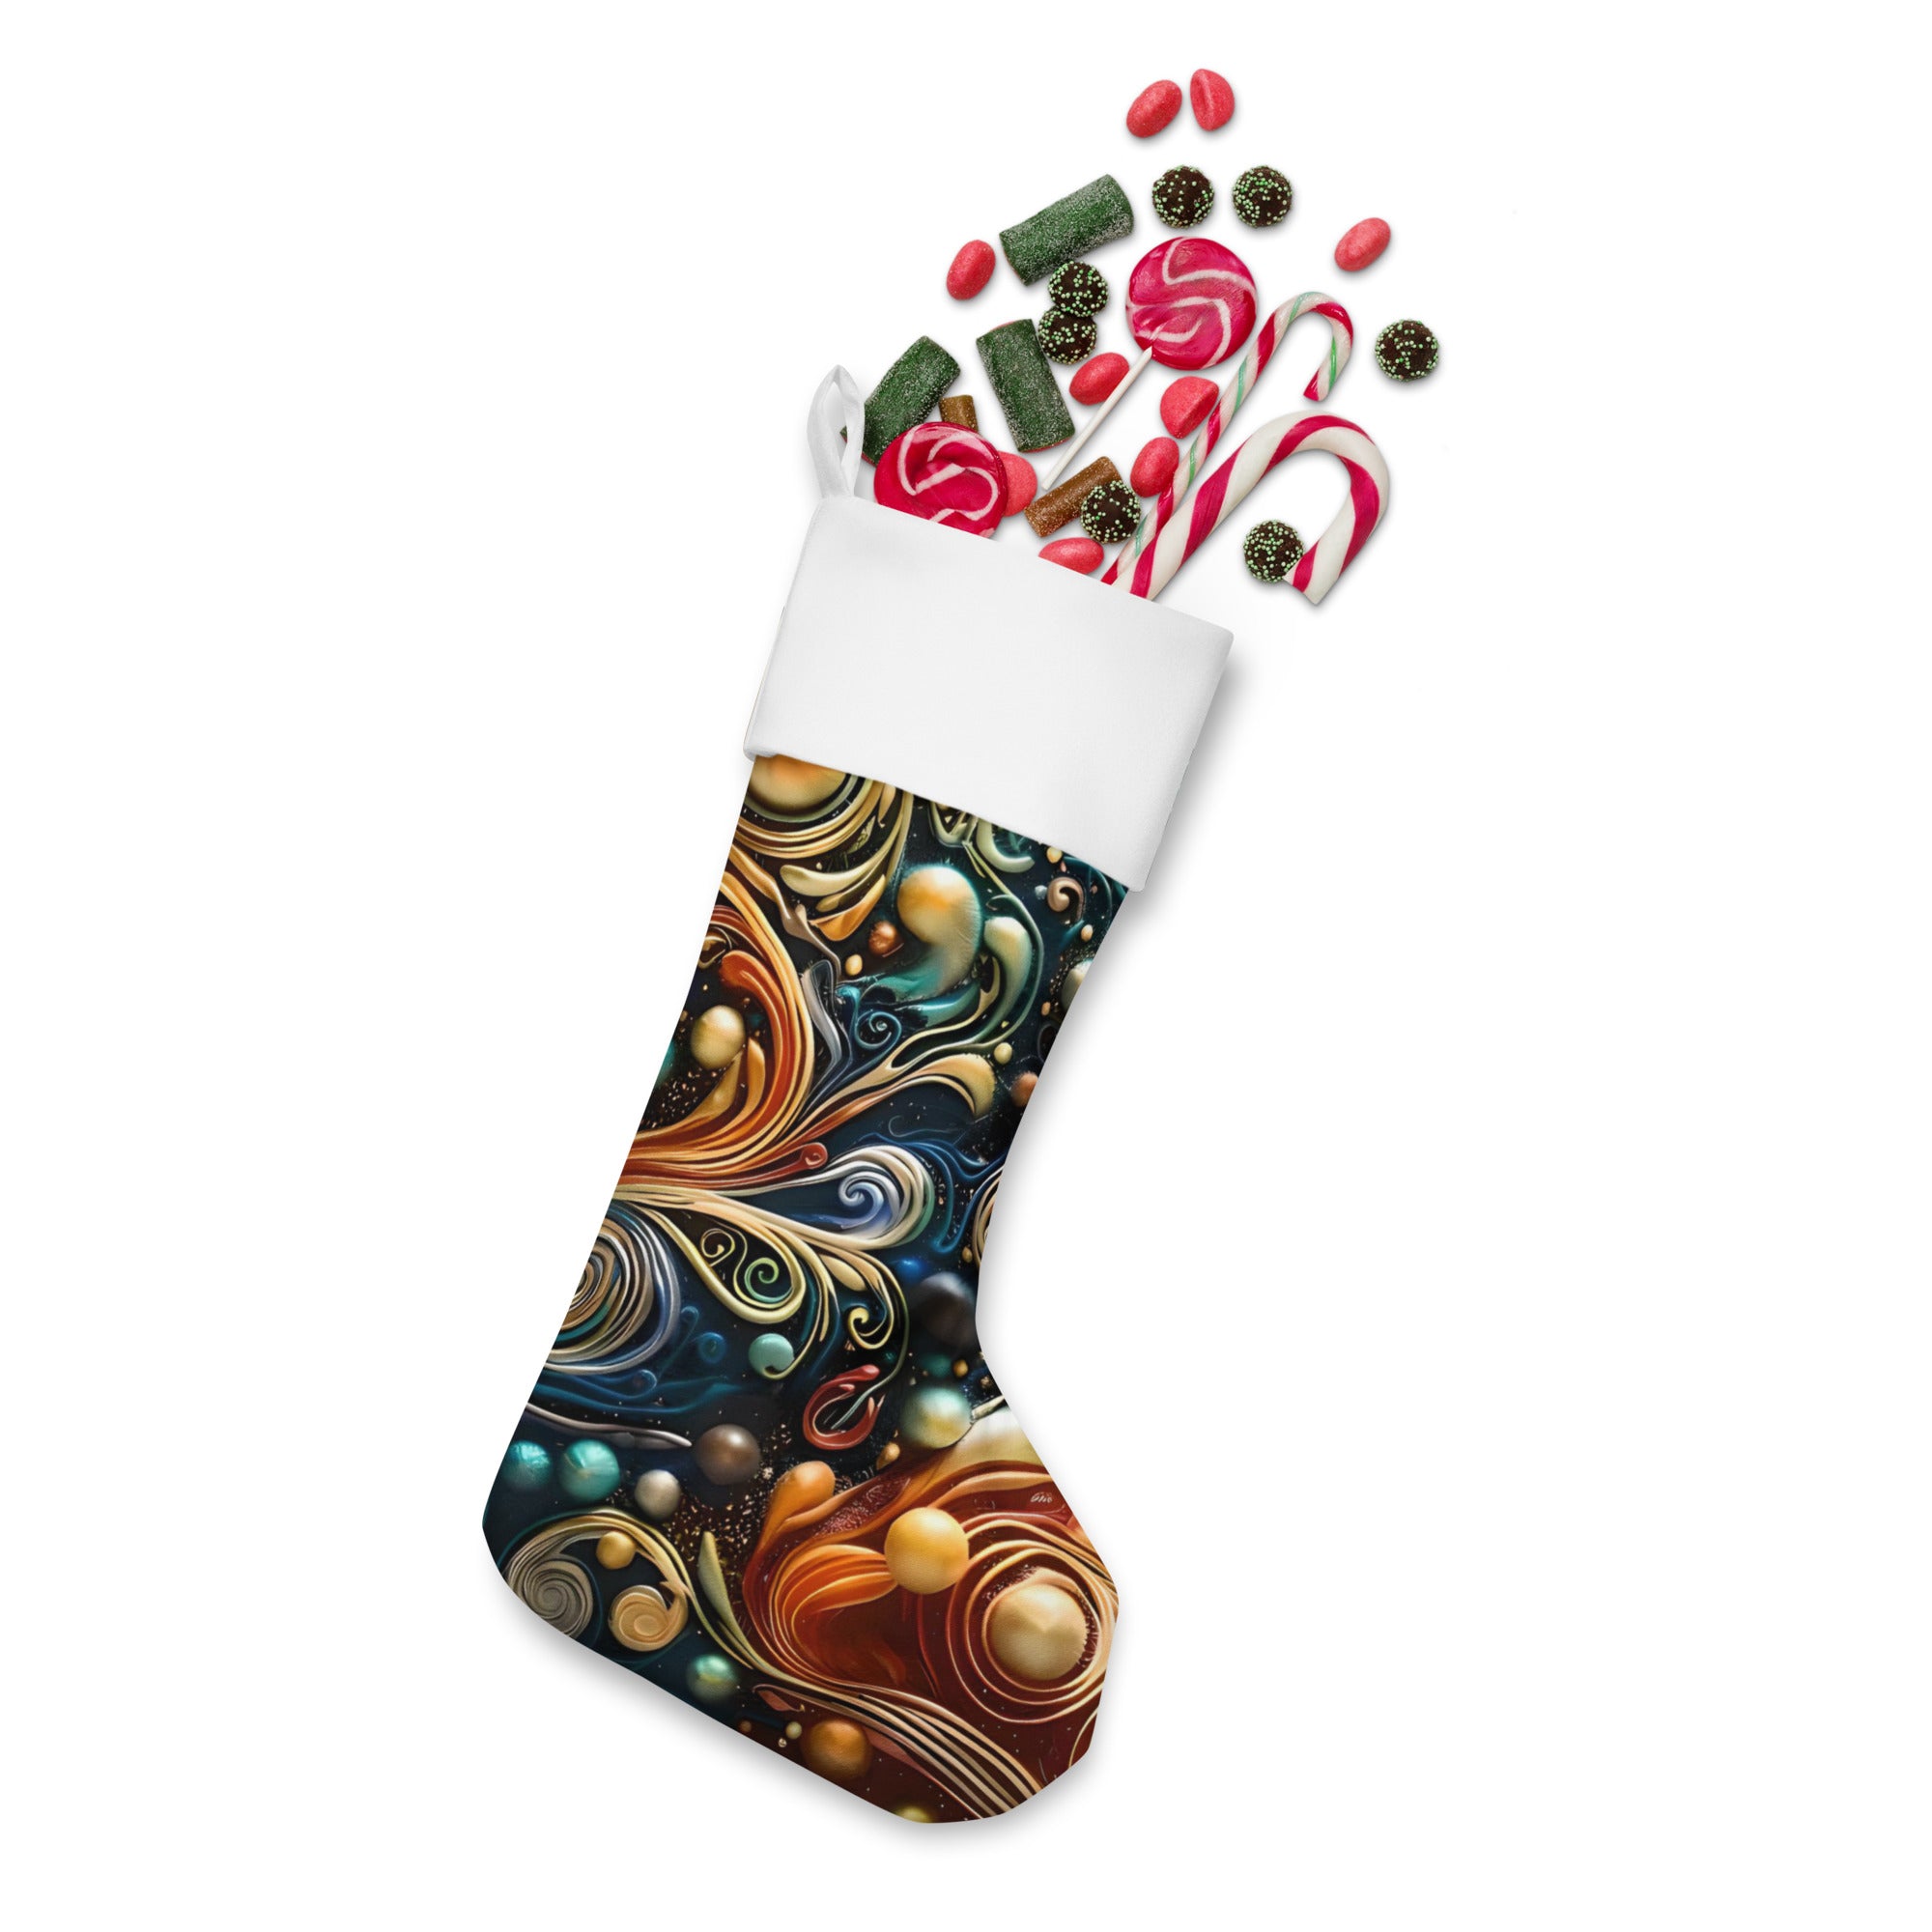 Merry Mantel Mates - Christmas Stockings (one-sided, with cuff)